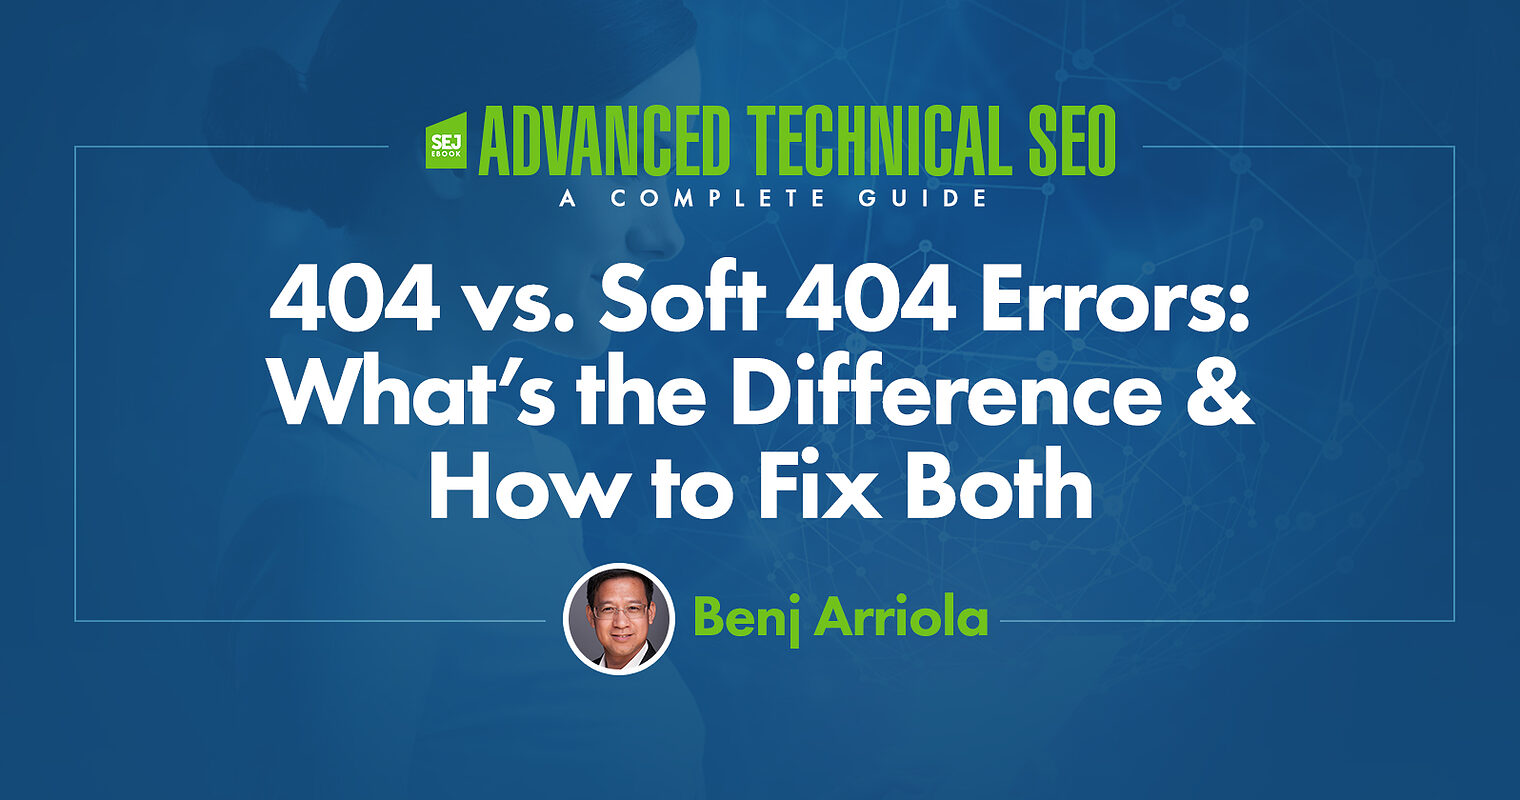 404 vs. Soft 404 Errors: What’s the Difference & How to Fix Both